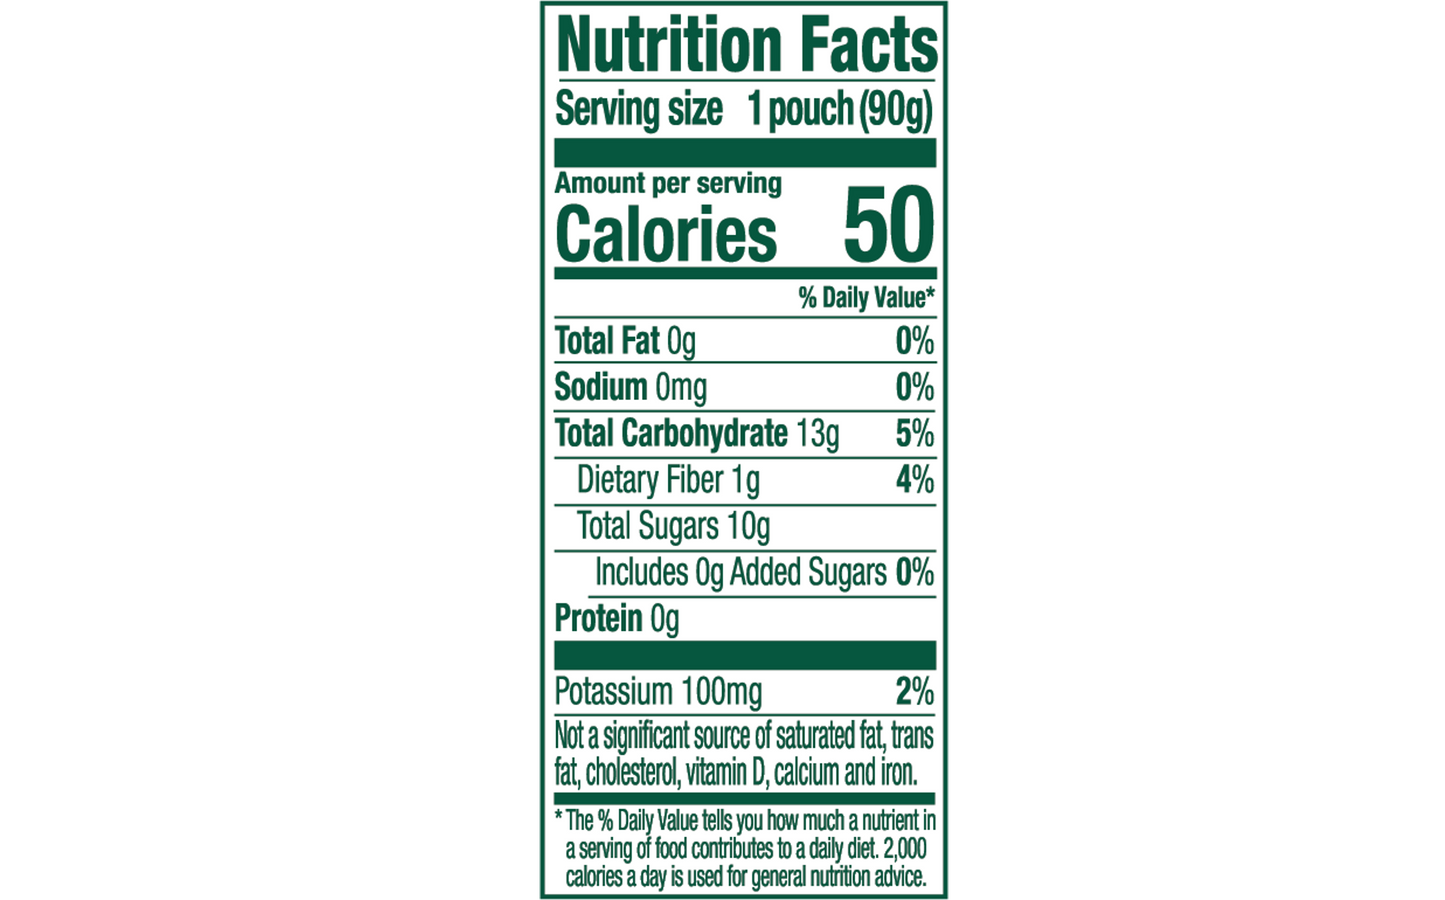 Nutrition facts for Buddy Fruits Banana & Apple fruit pouch.